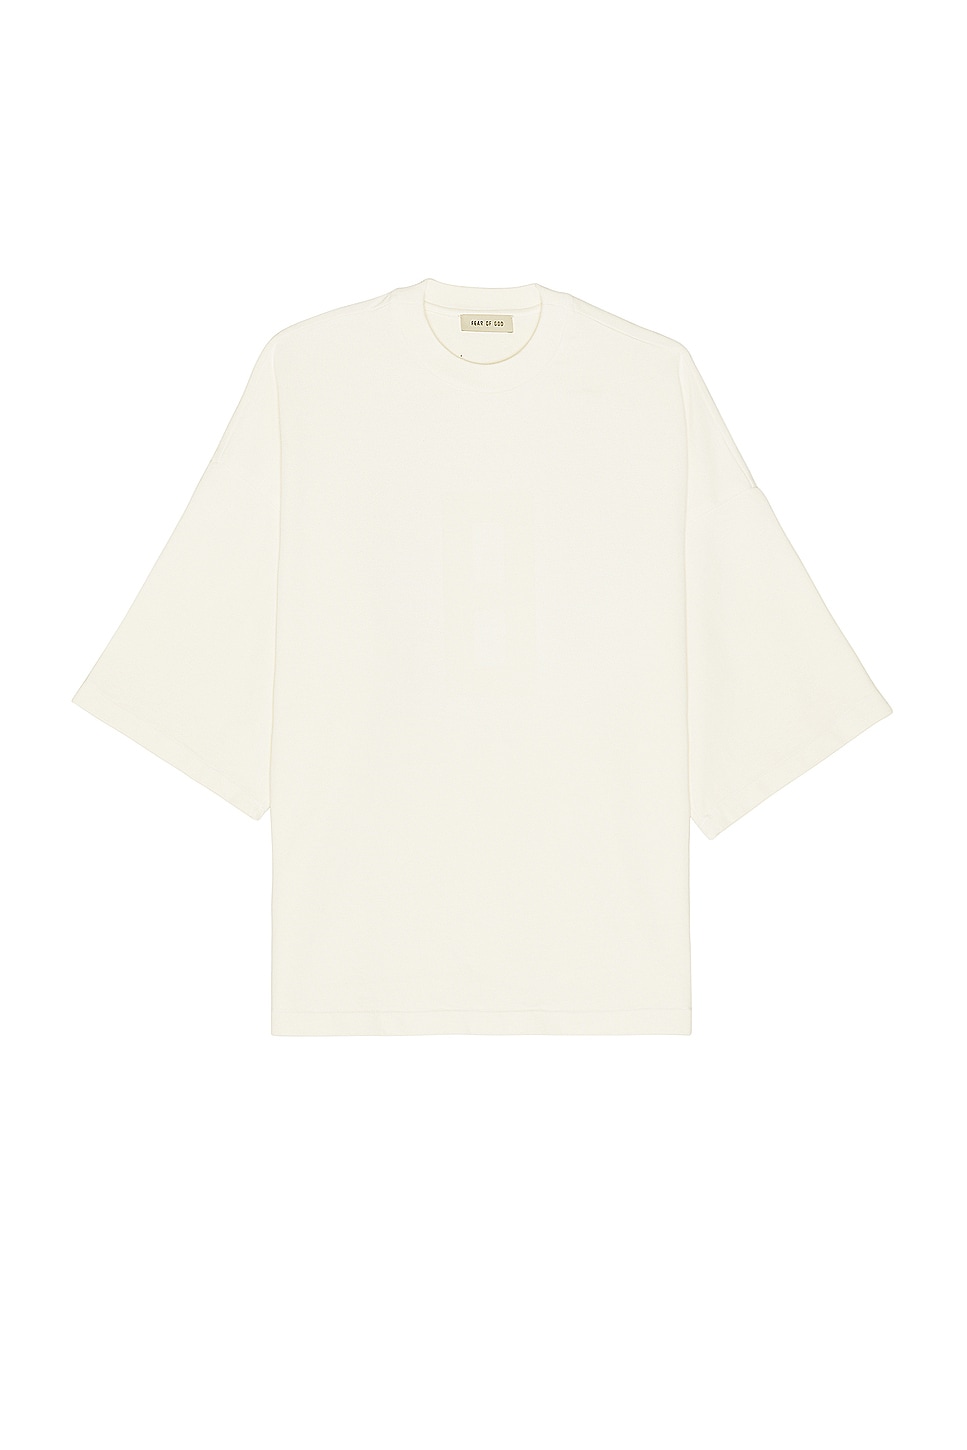 Image 1 of Fear of God Airbrush 8 Ss Tee in Cream